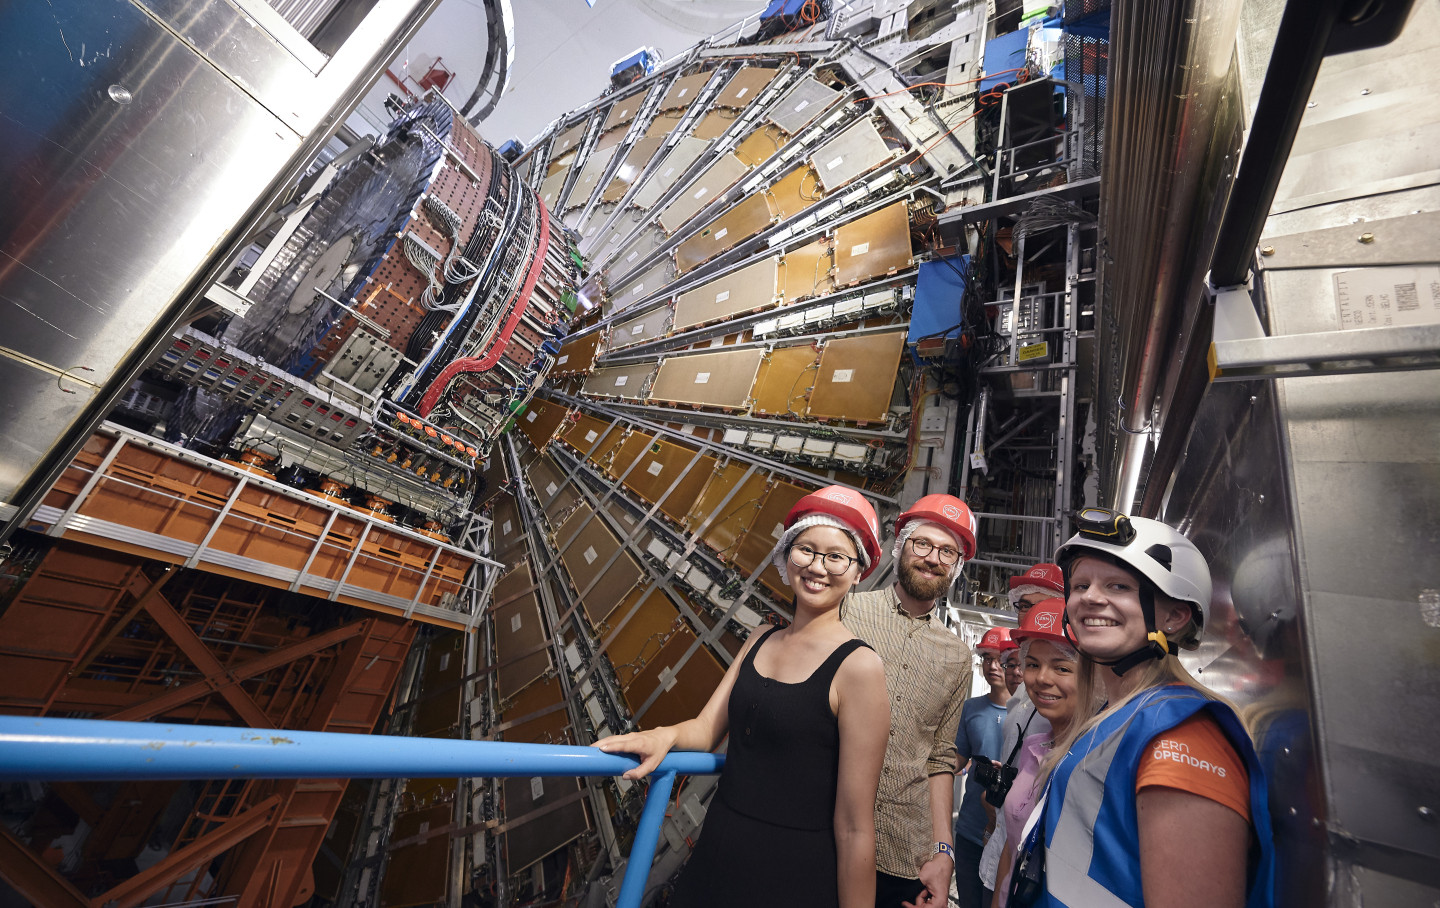 A group of men and women in hardhats pose, smiling, by a blue railing separating them from a large, complex particle detector at a high-energy accelerator laboratory